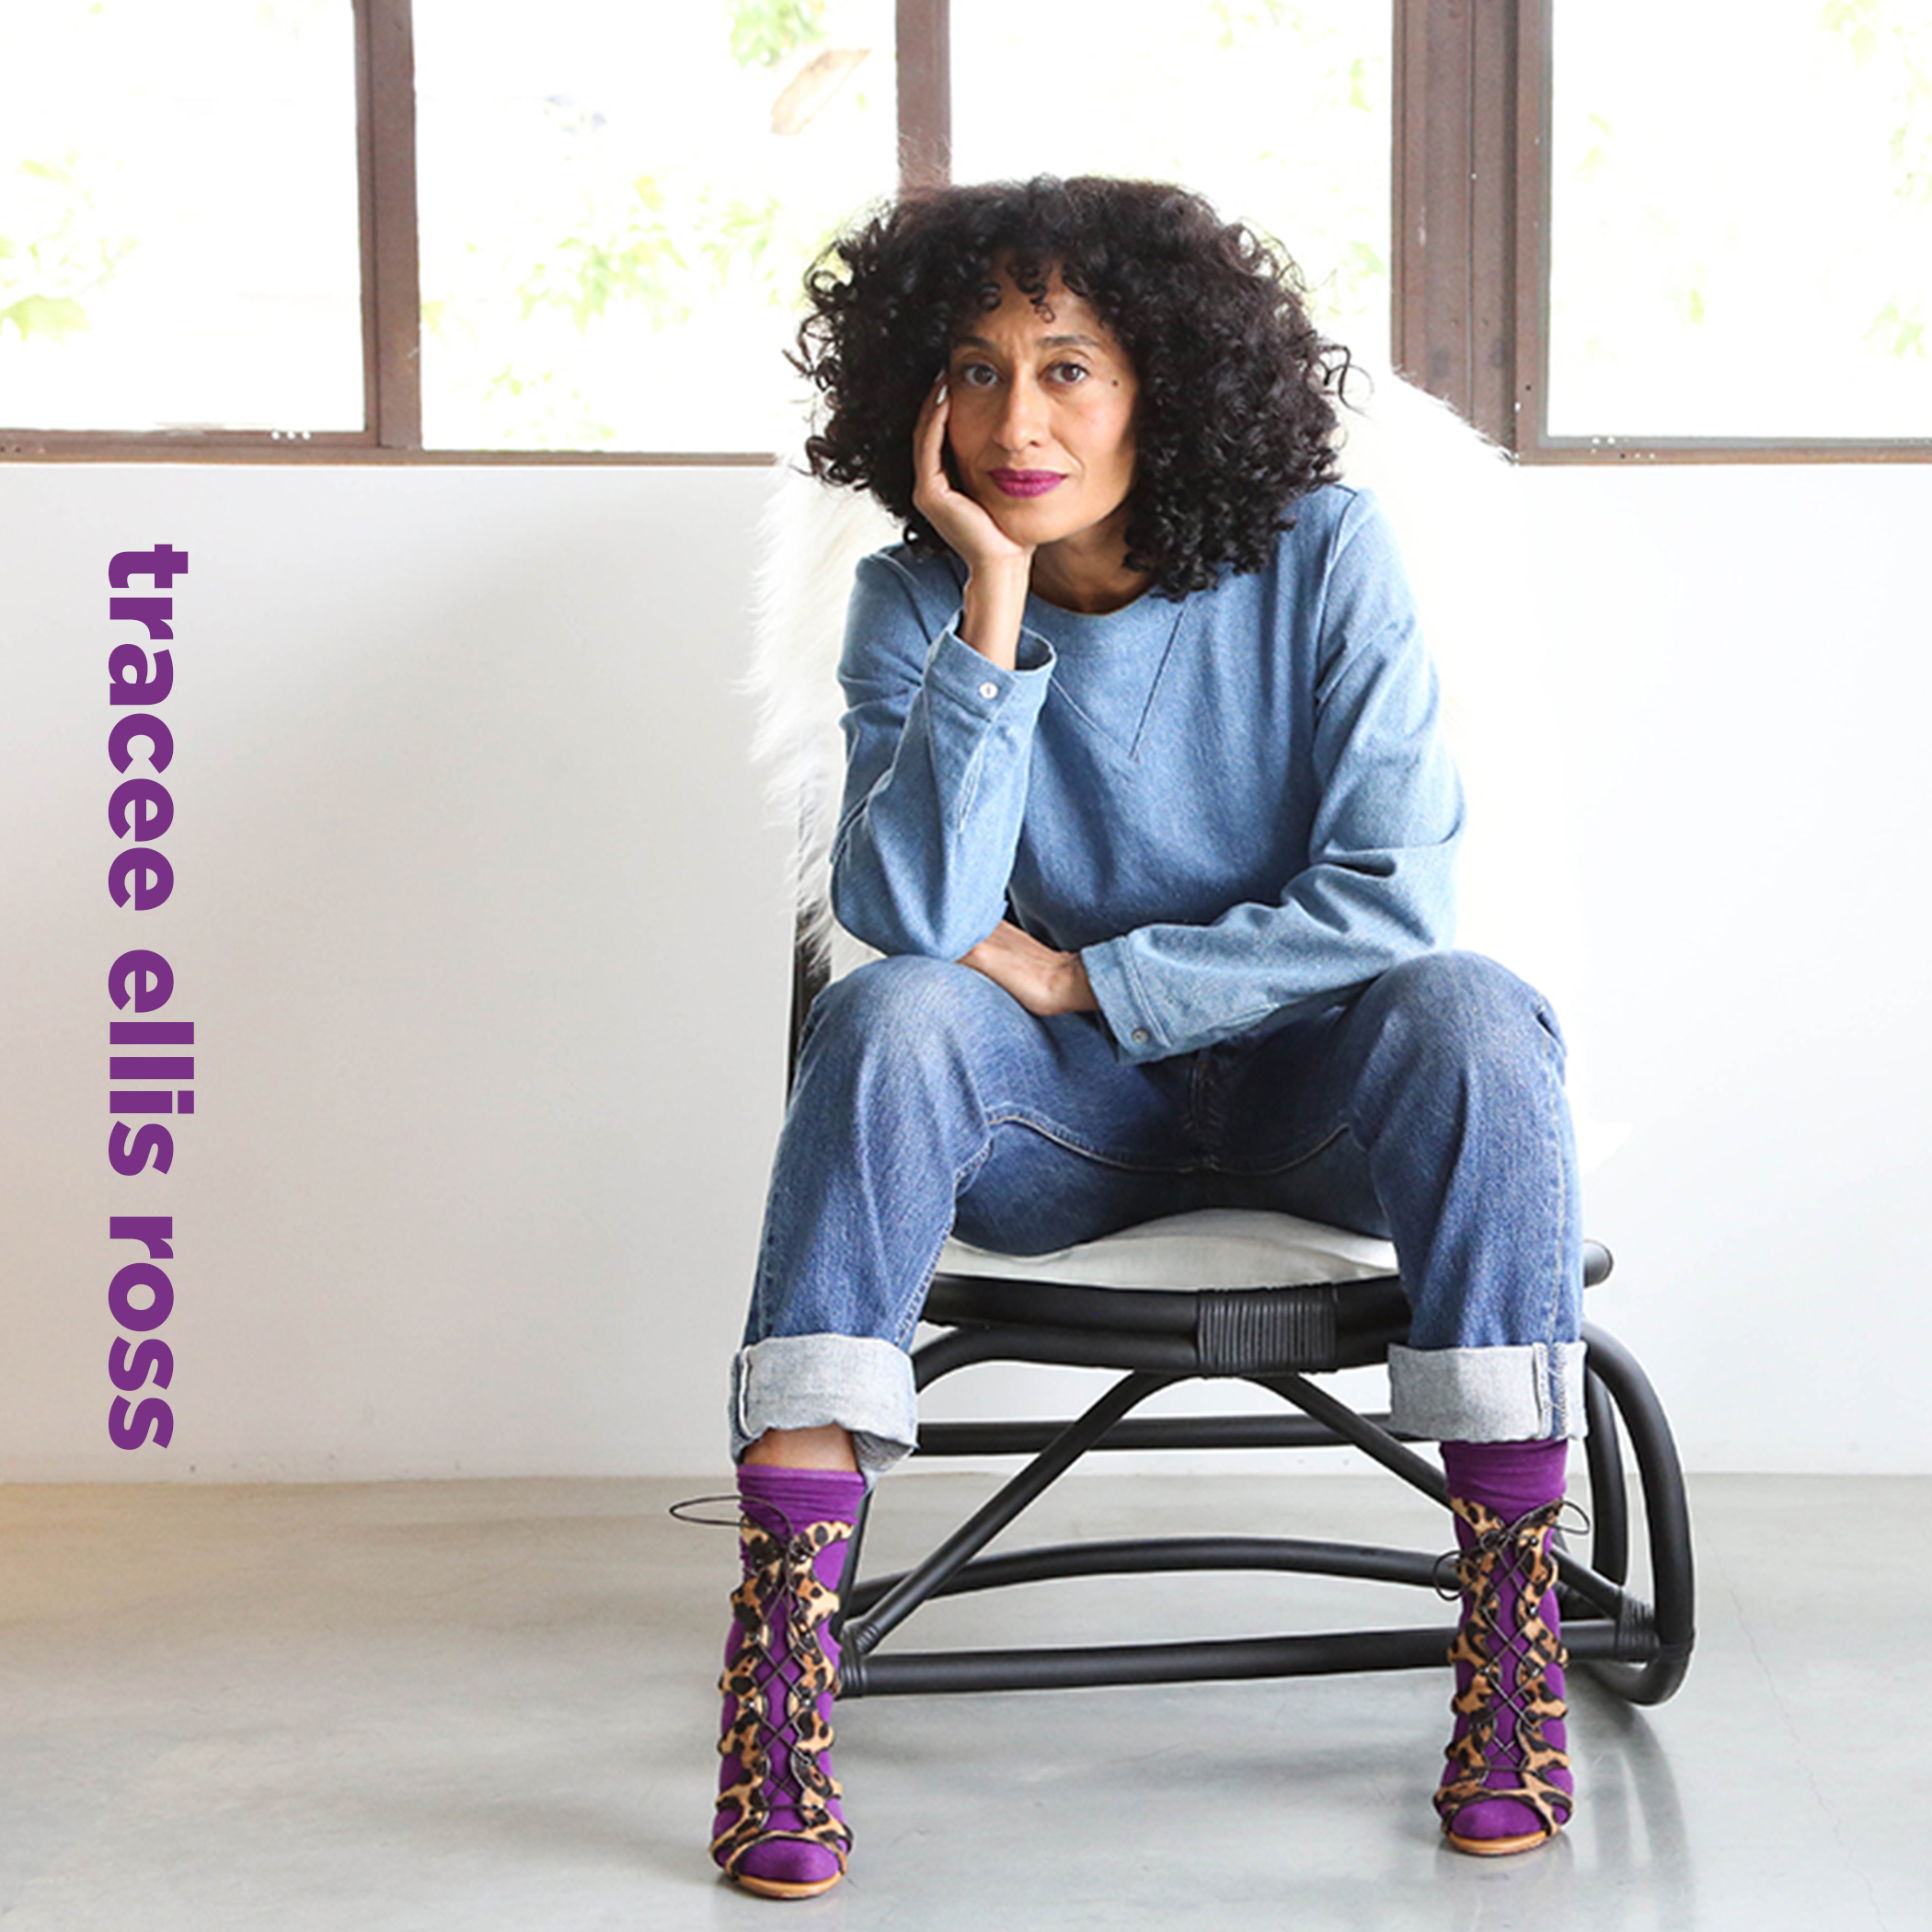 tracee ellis ross: the style goat